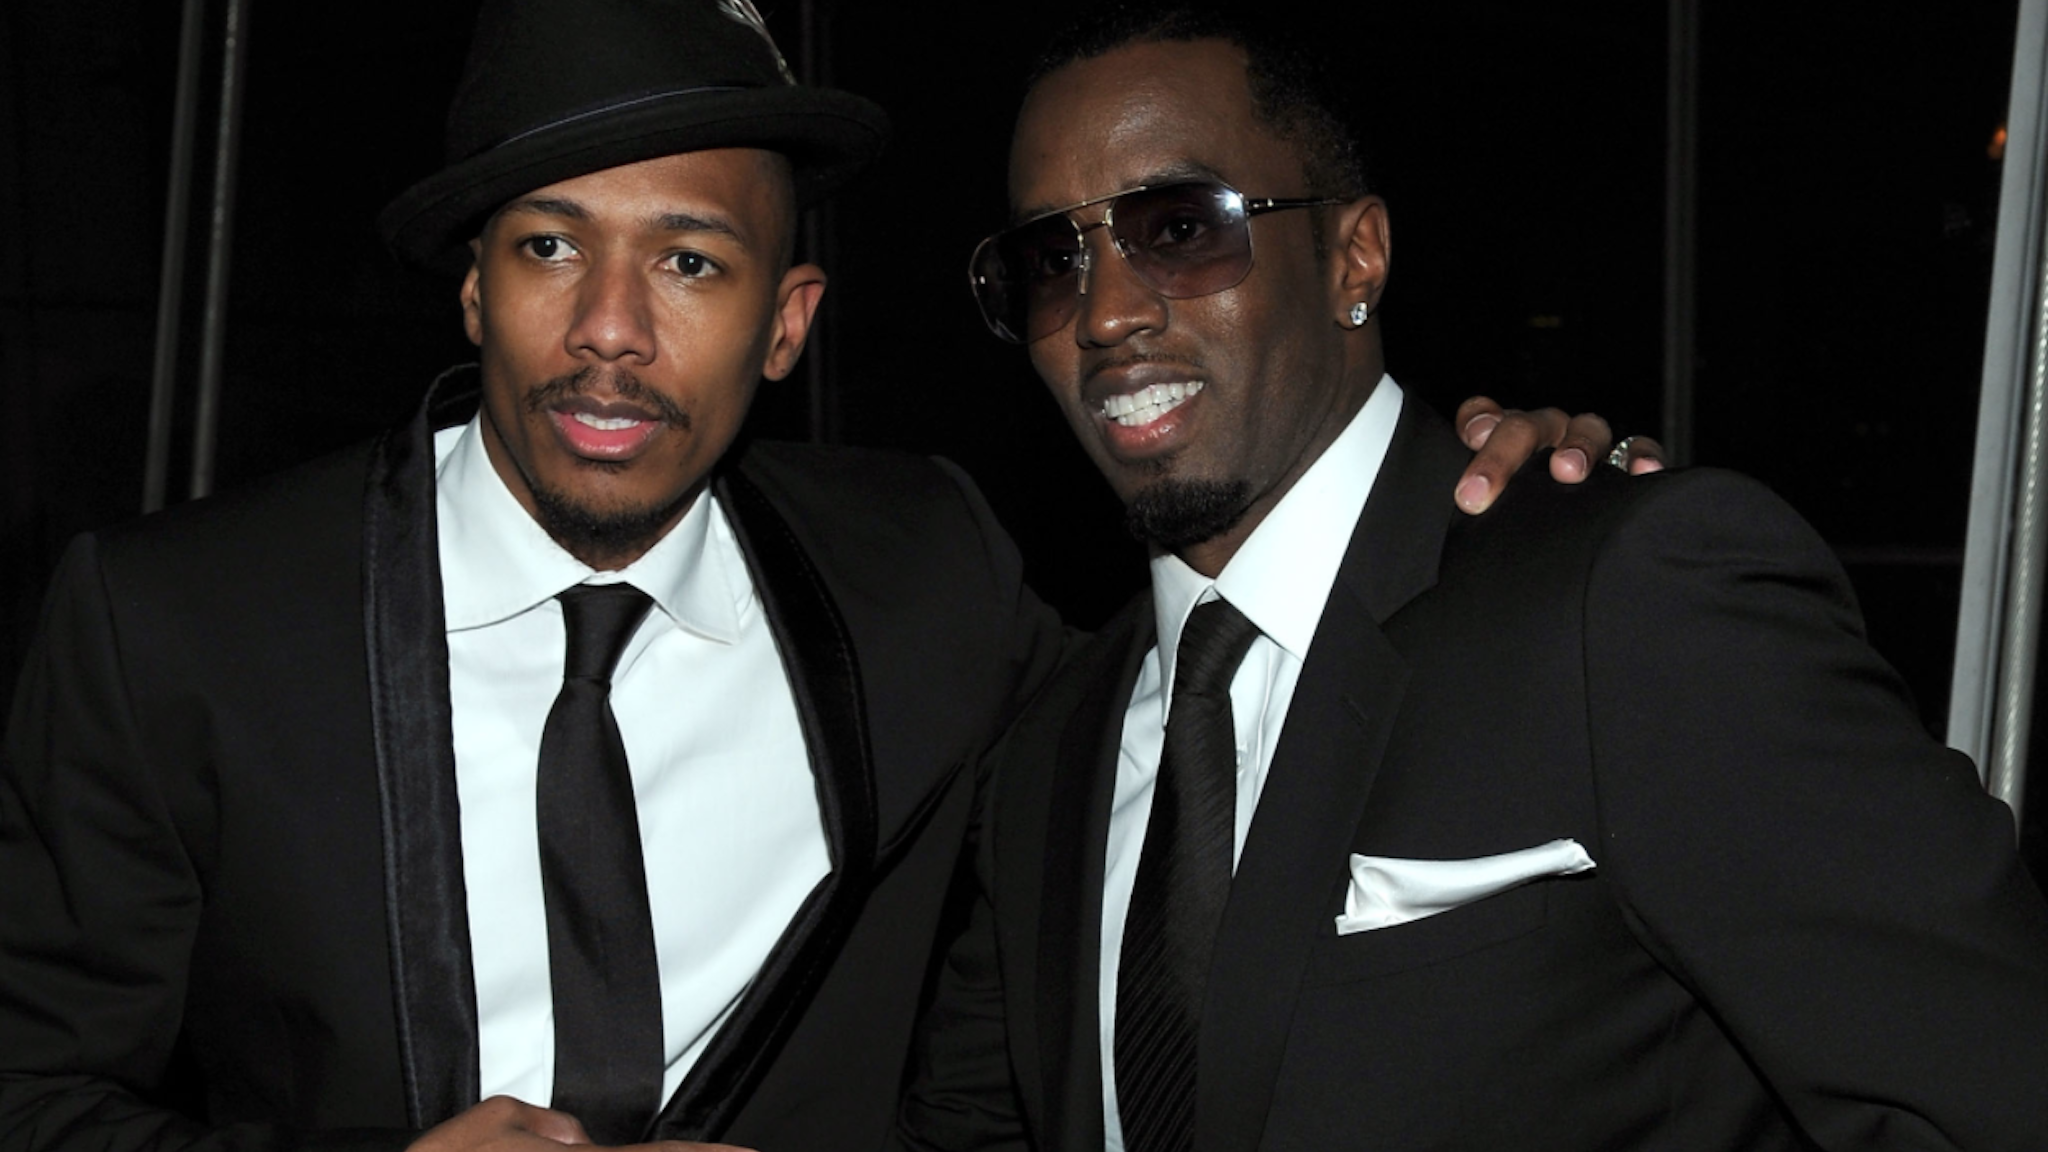 NEW YORK - DECEMBER 09: Actor Nick Cannon (L) and Sean "Diddy" Combs attend City Of Hope's Music and Entertainment Industry Presents The Roast Of Stephen Hill at Jazz at Lincoln Center on December 9, 2010 in New York City.